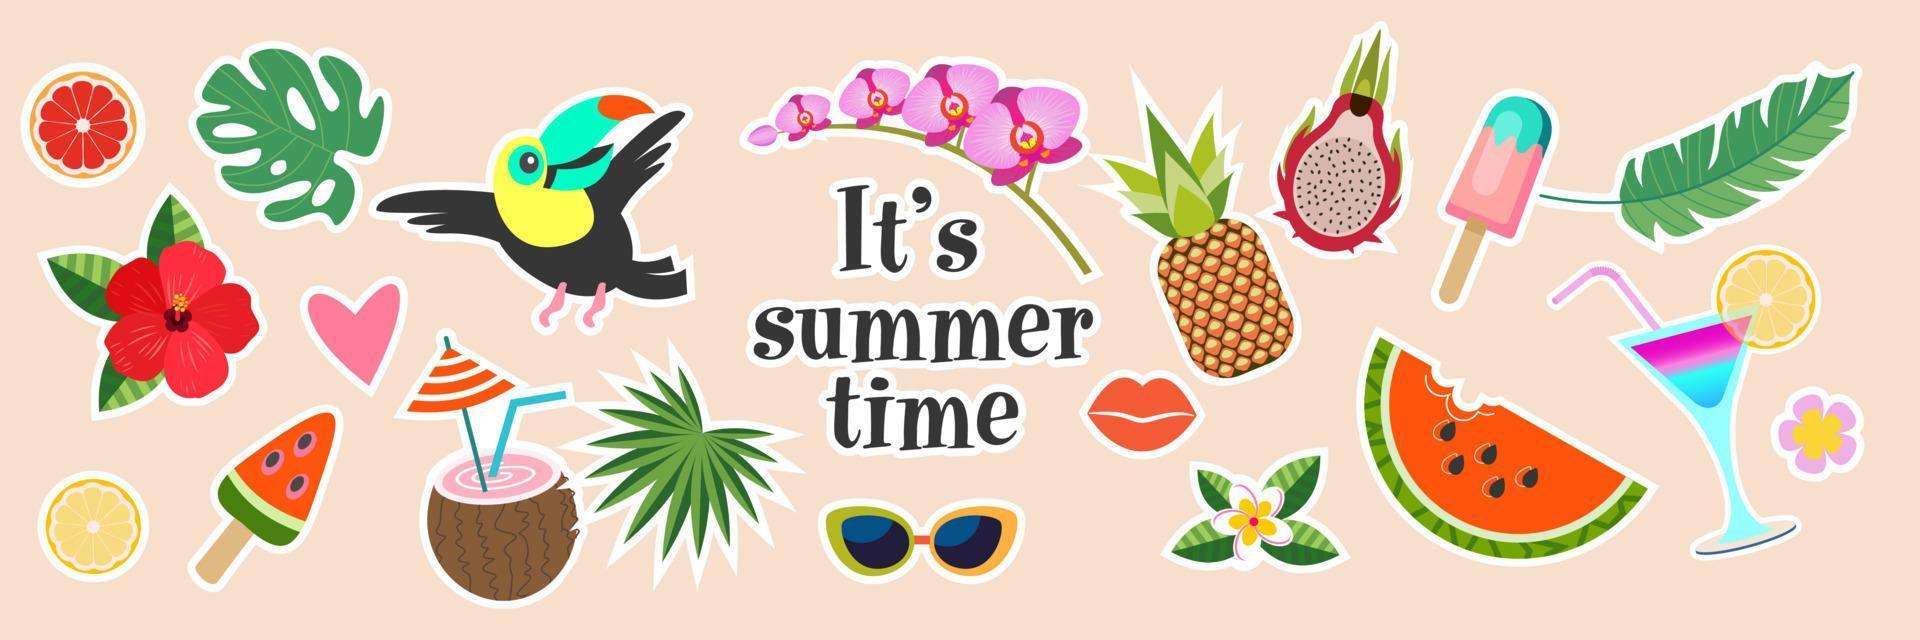 It's summer time. Vector bright colorful illustration. Horizontal banner.